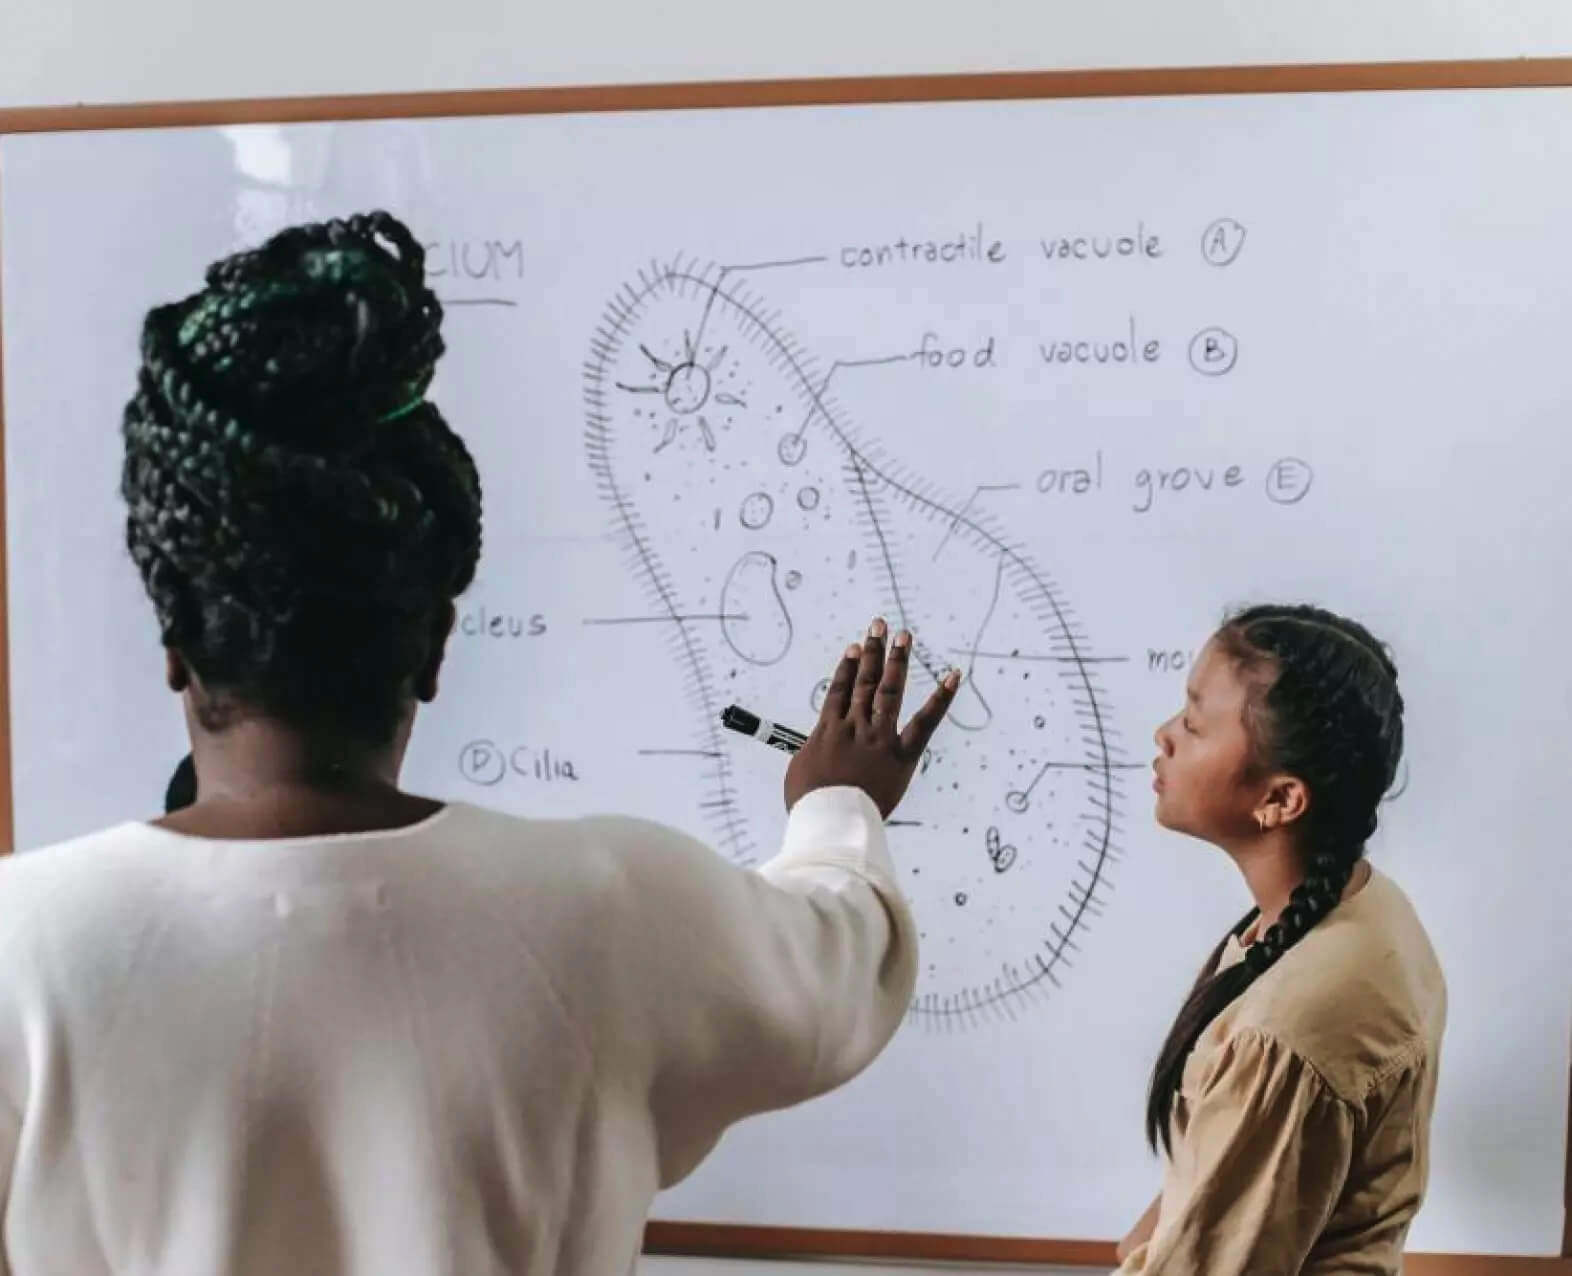 Two women at a whiteboard discussing a biological diagram. (photo)